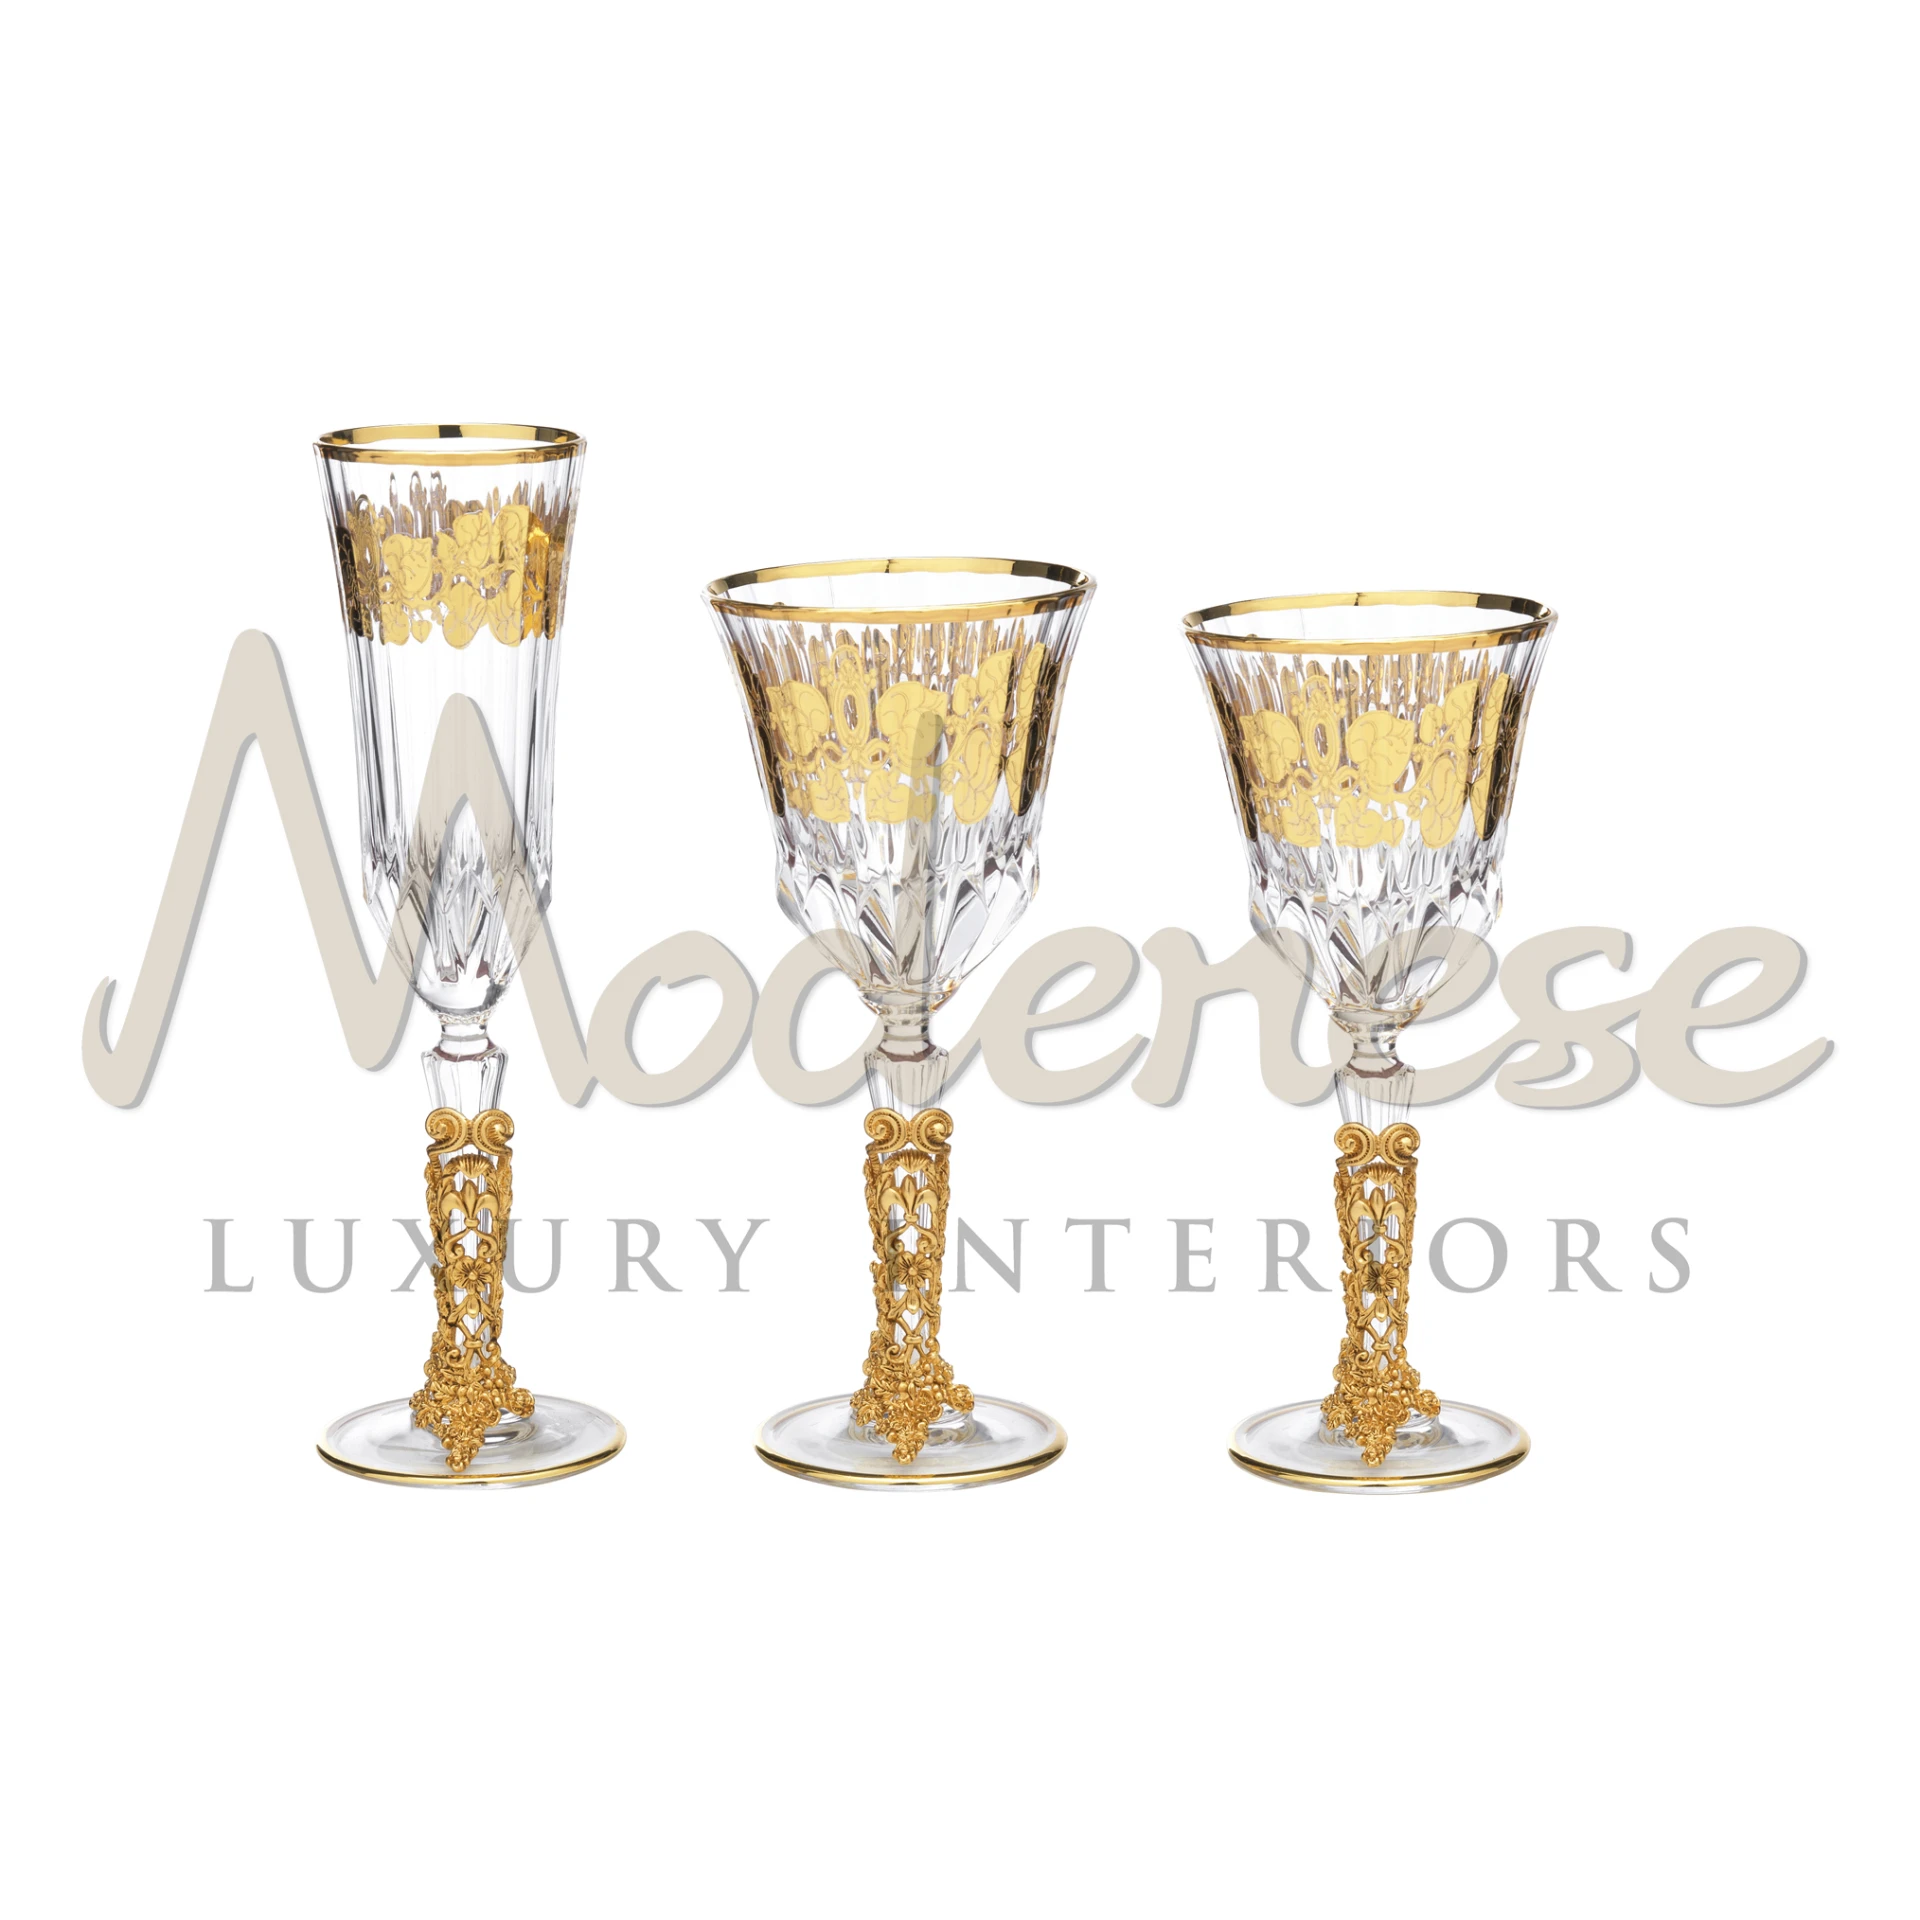 Three modish crystal glasses with golden details